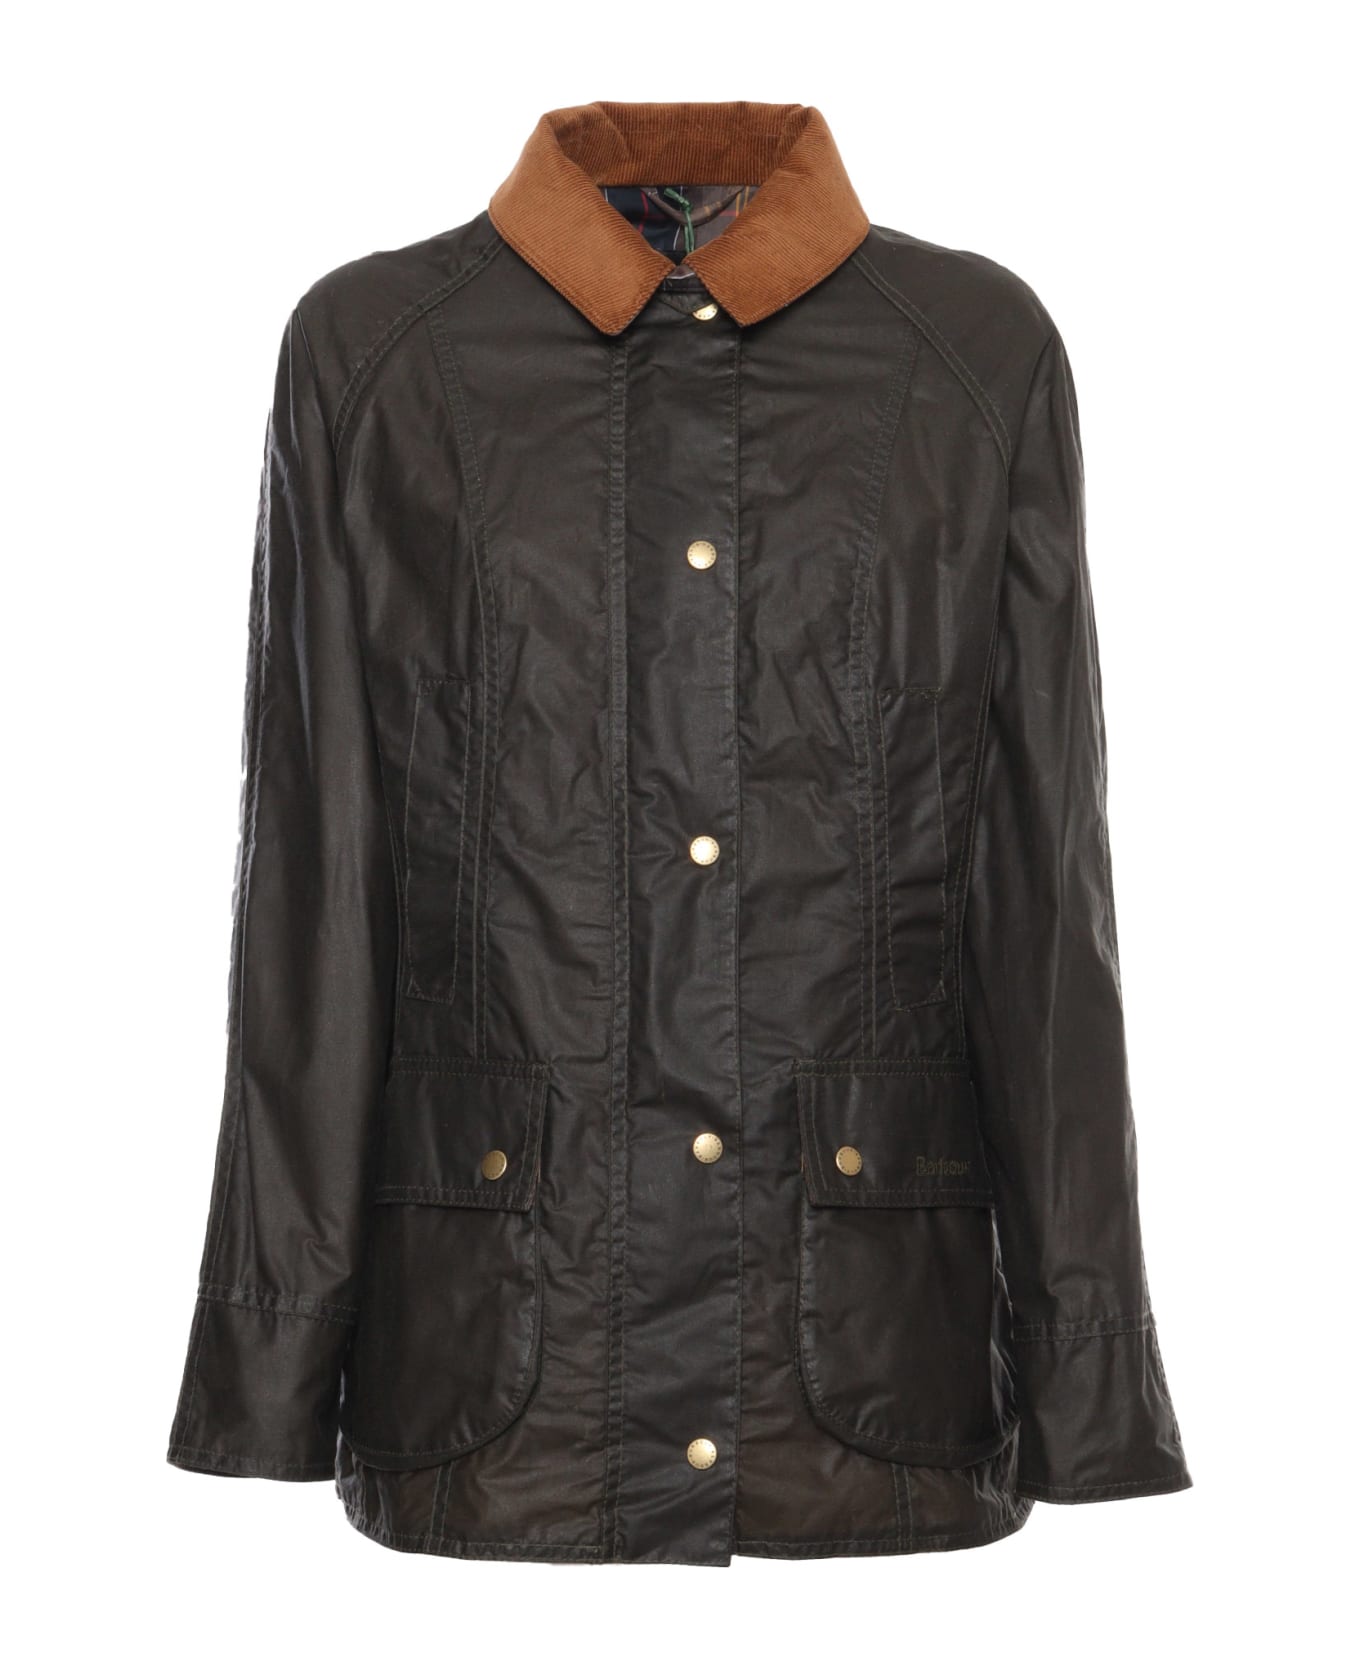 Barbour Beadnell Jacket - Archive Olive